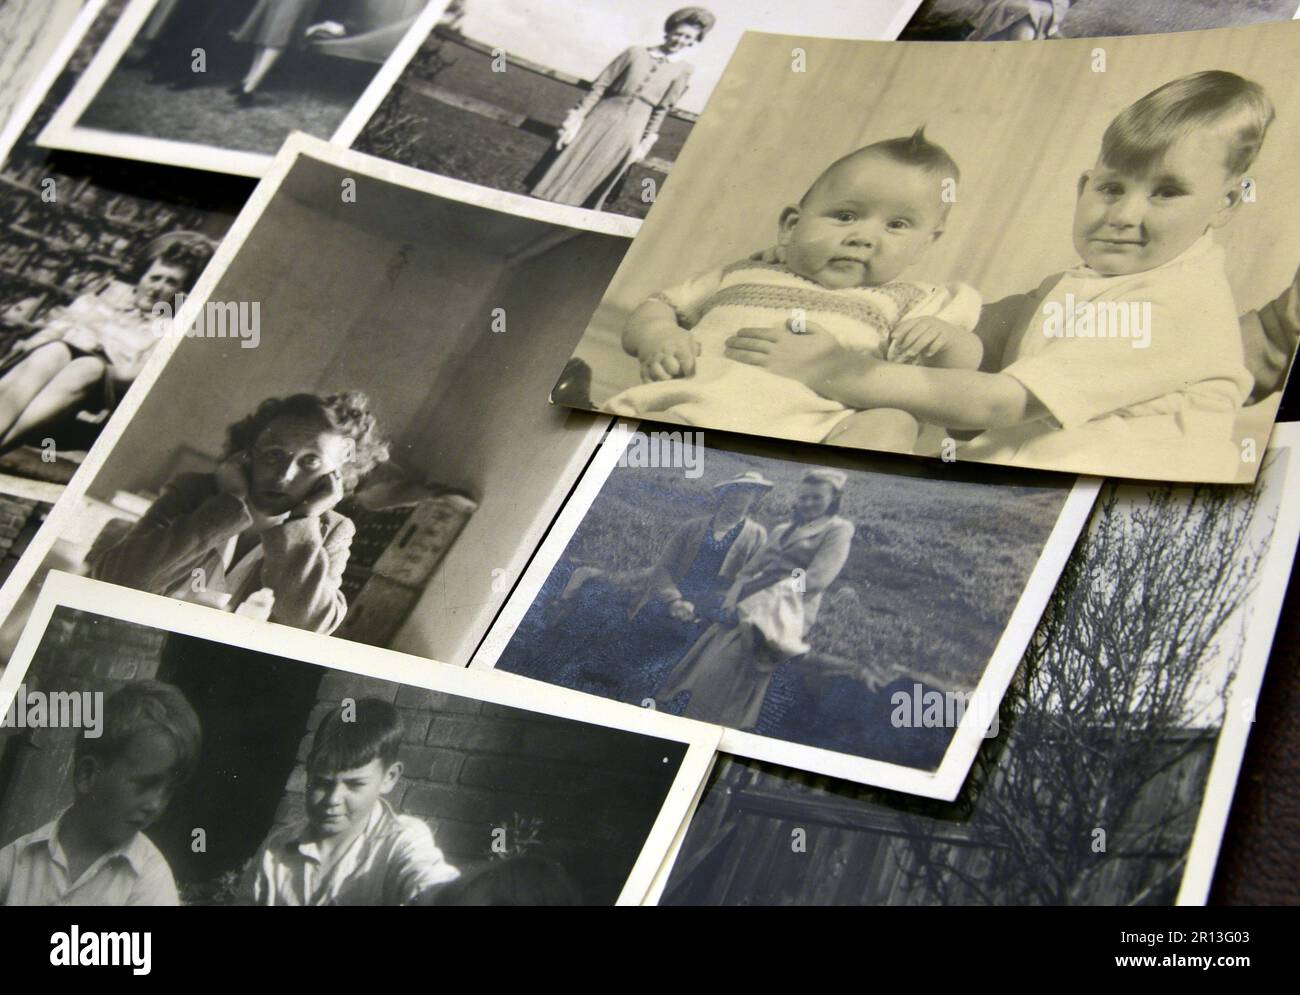 A collection of old, vintage black and white family photographic prints. Retro theme. Stock Photo